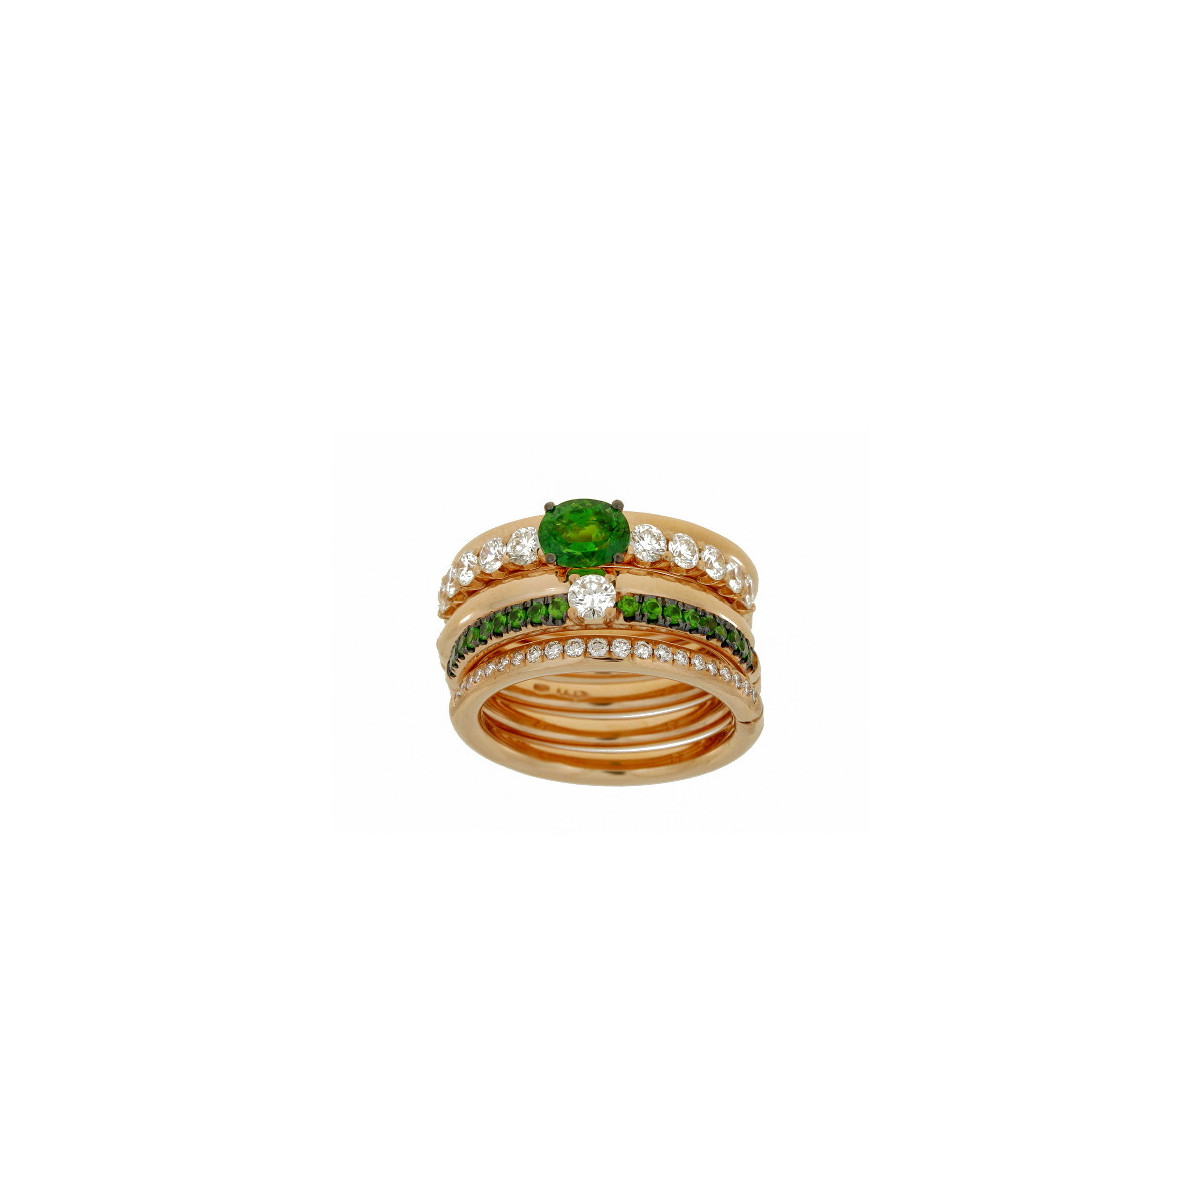 5 GOLD RINGS WITH TSAVORITE